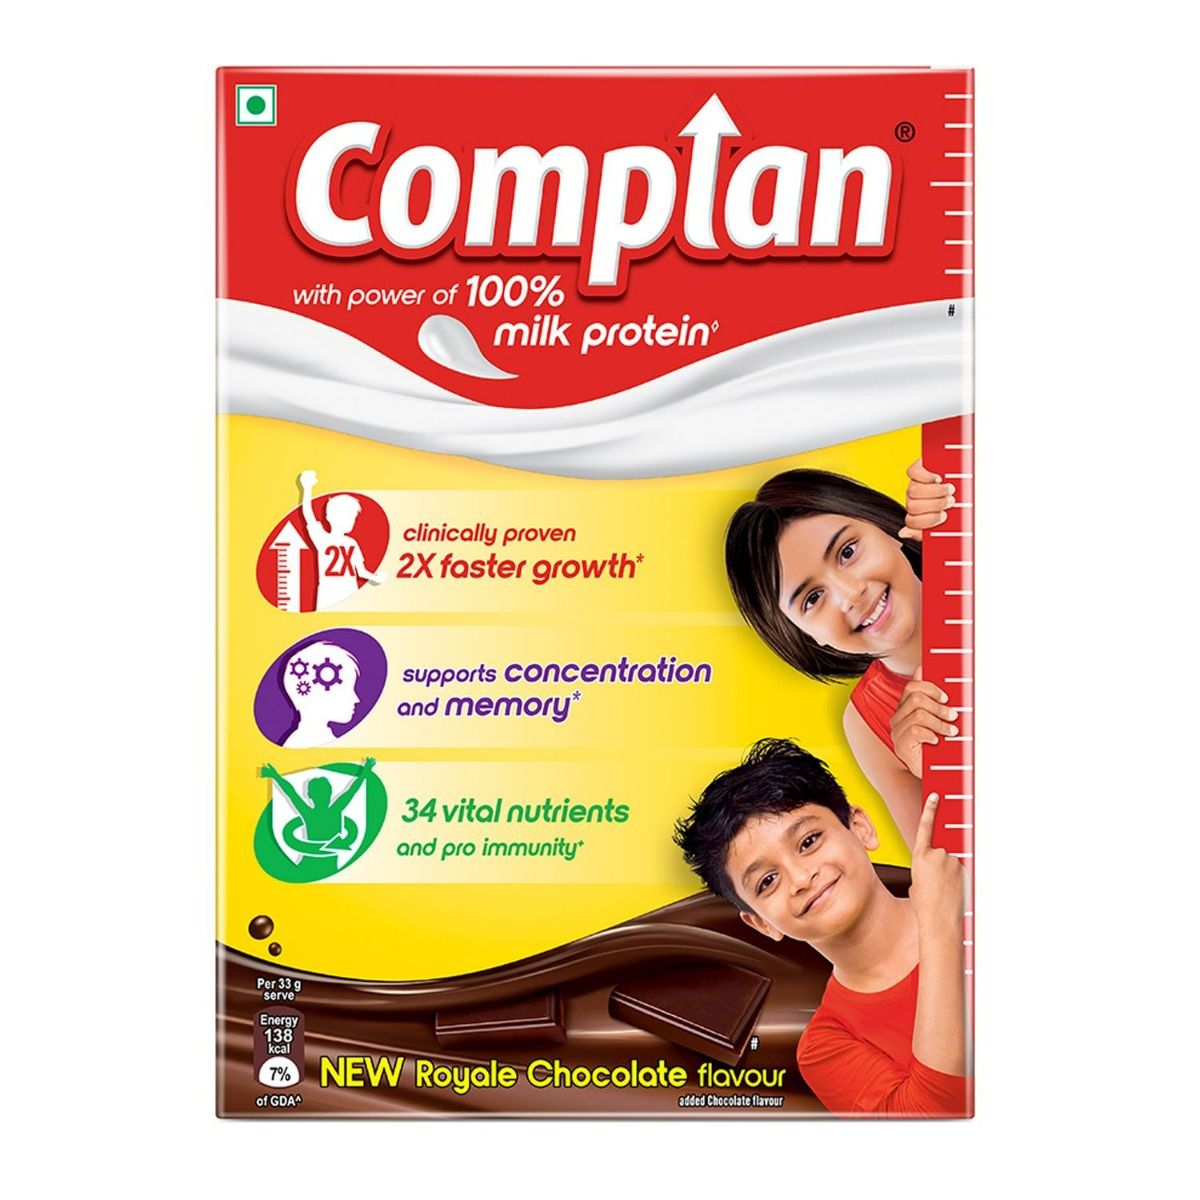 Complan Royale Chocolate Flavoured Health & Nutrition Drink, 500 gm Refill Pack, Pack of 1 